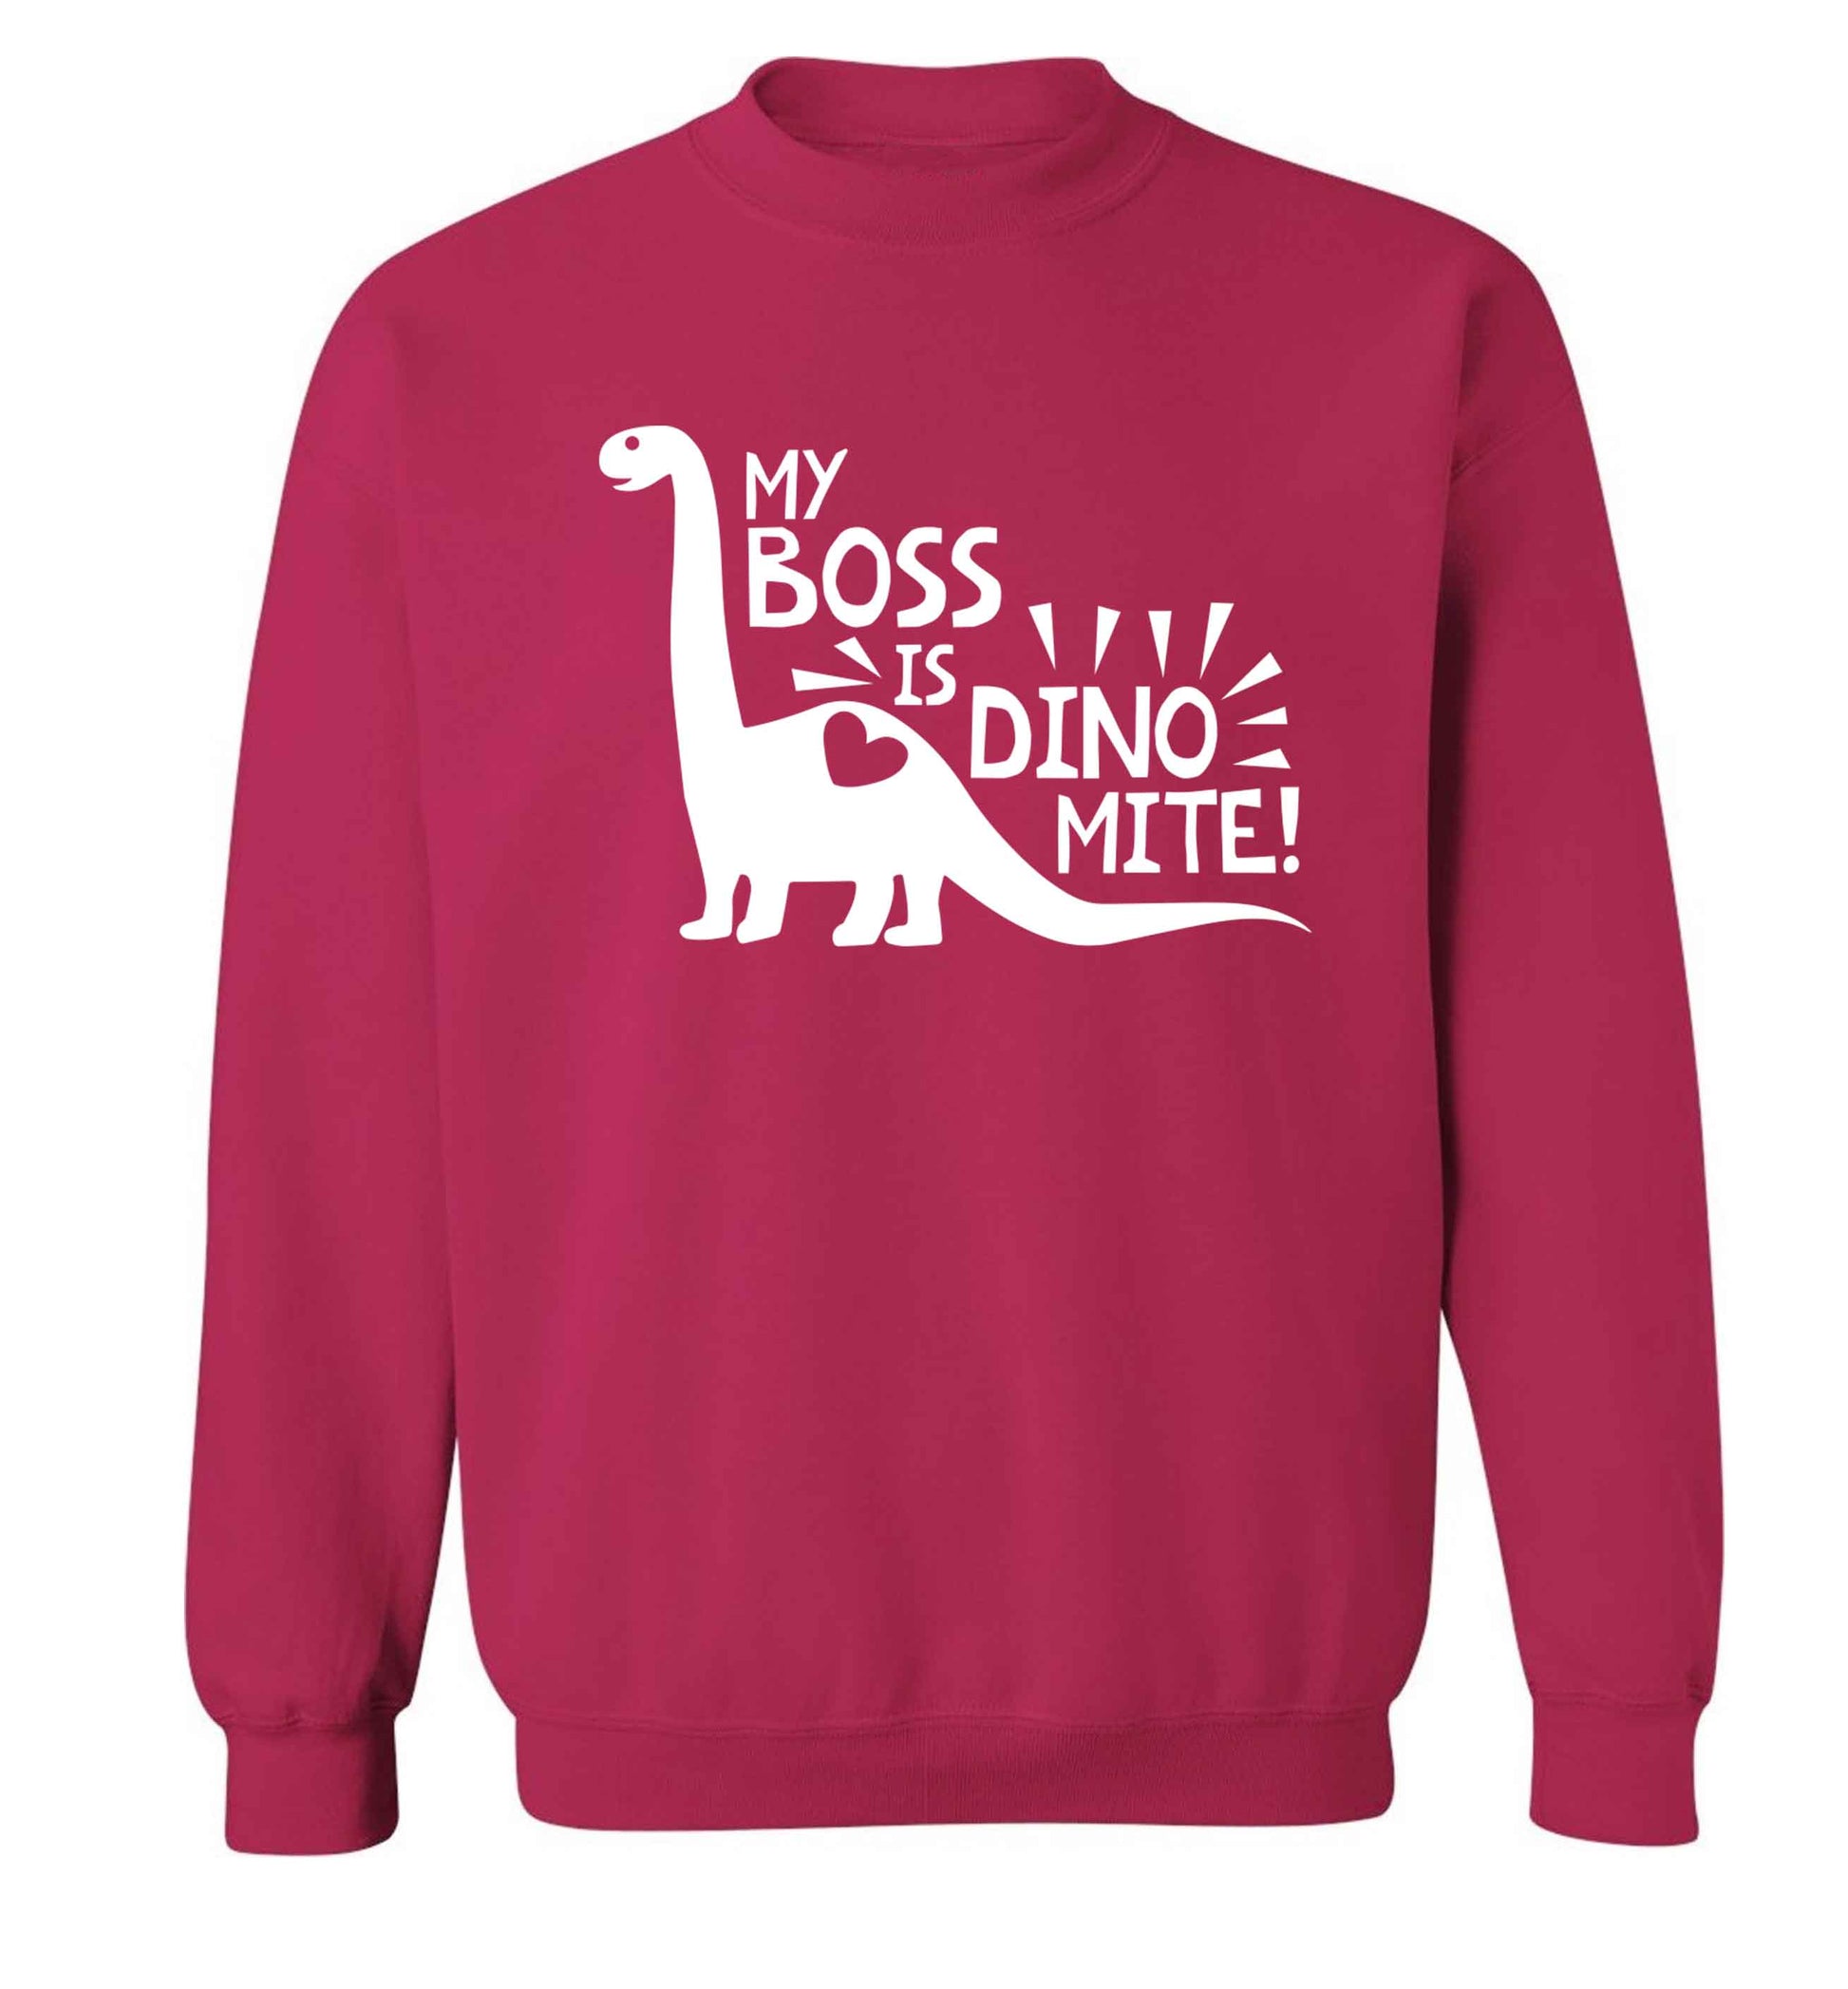 My boss is dinomite! Adult's unisex pink Sweater 2XL